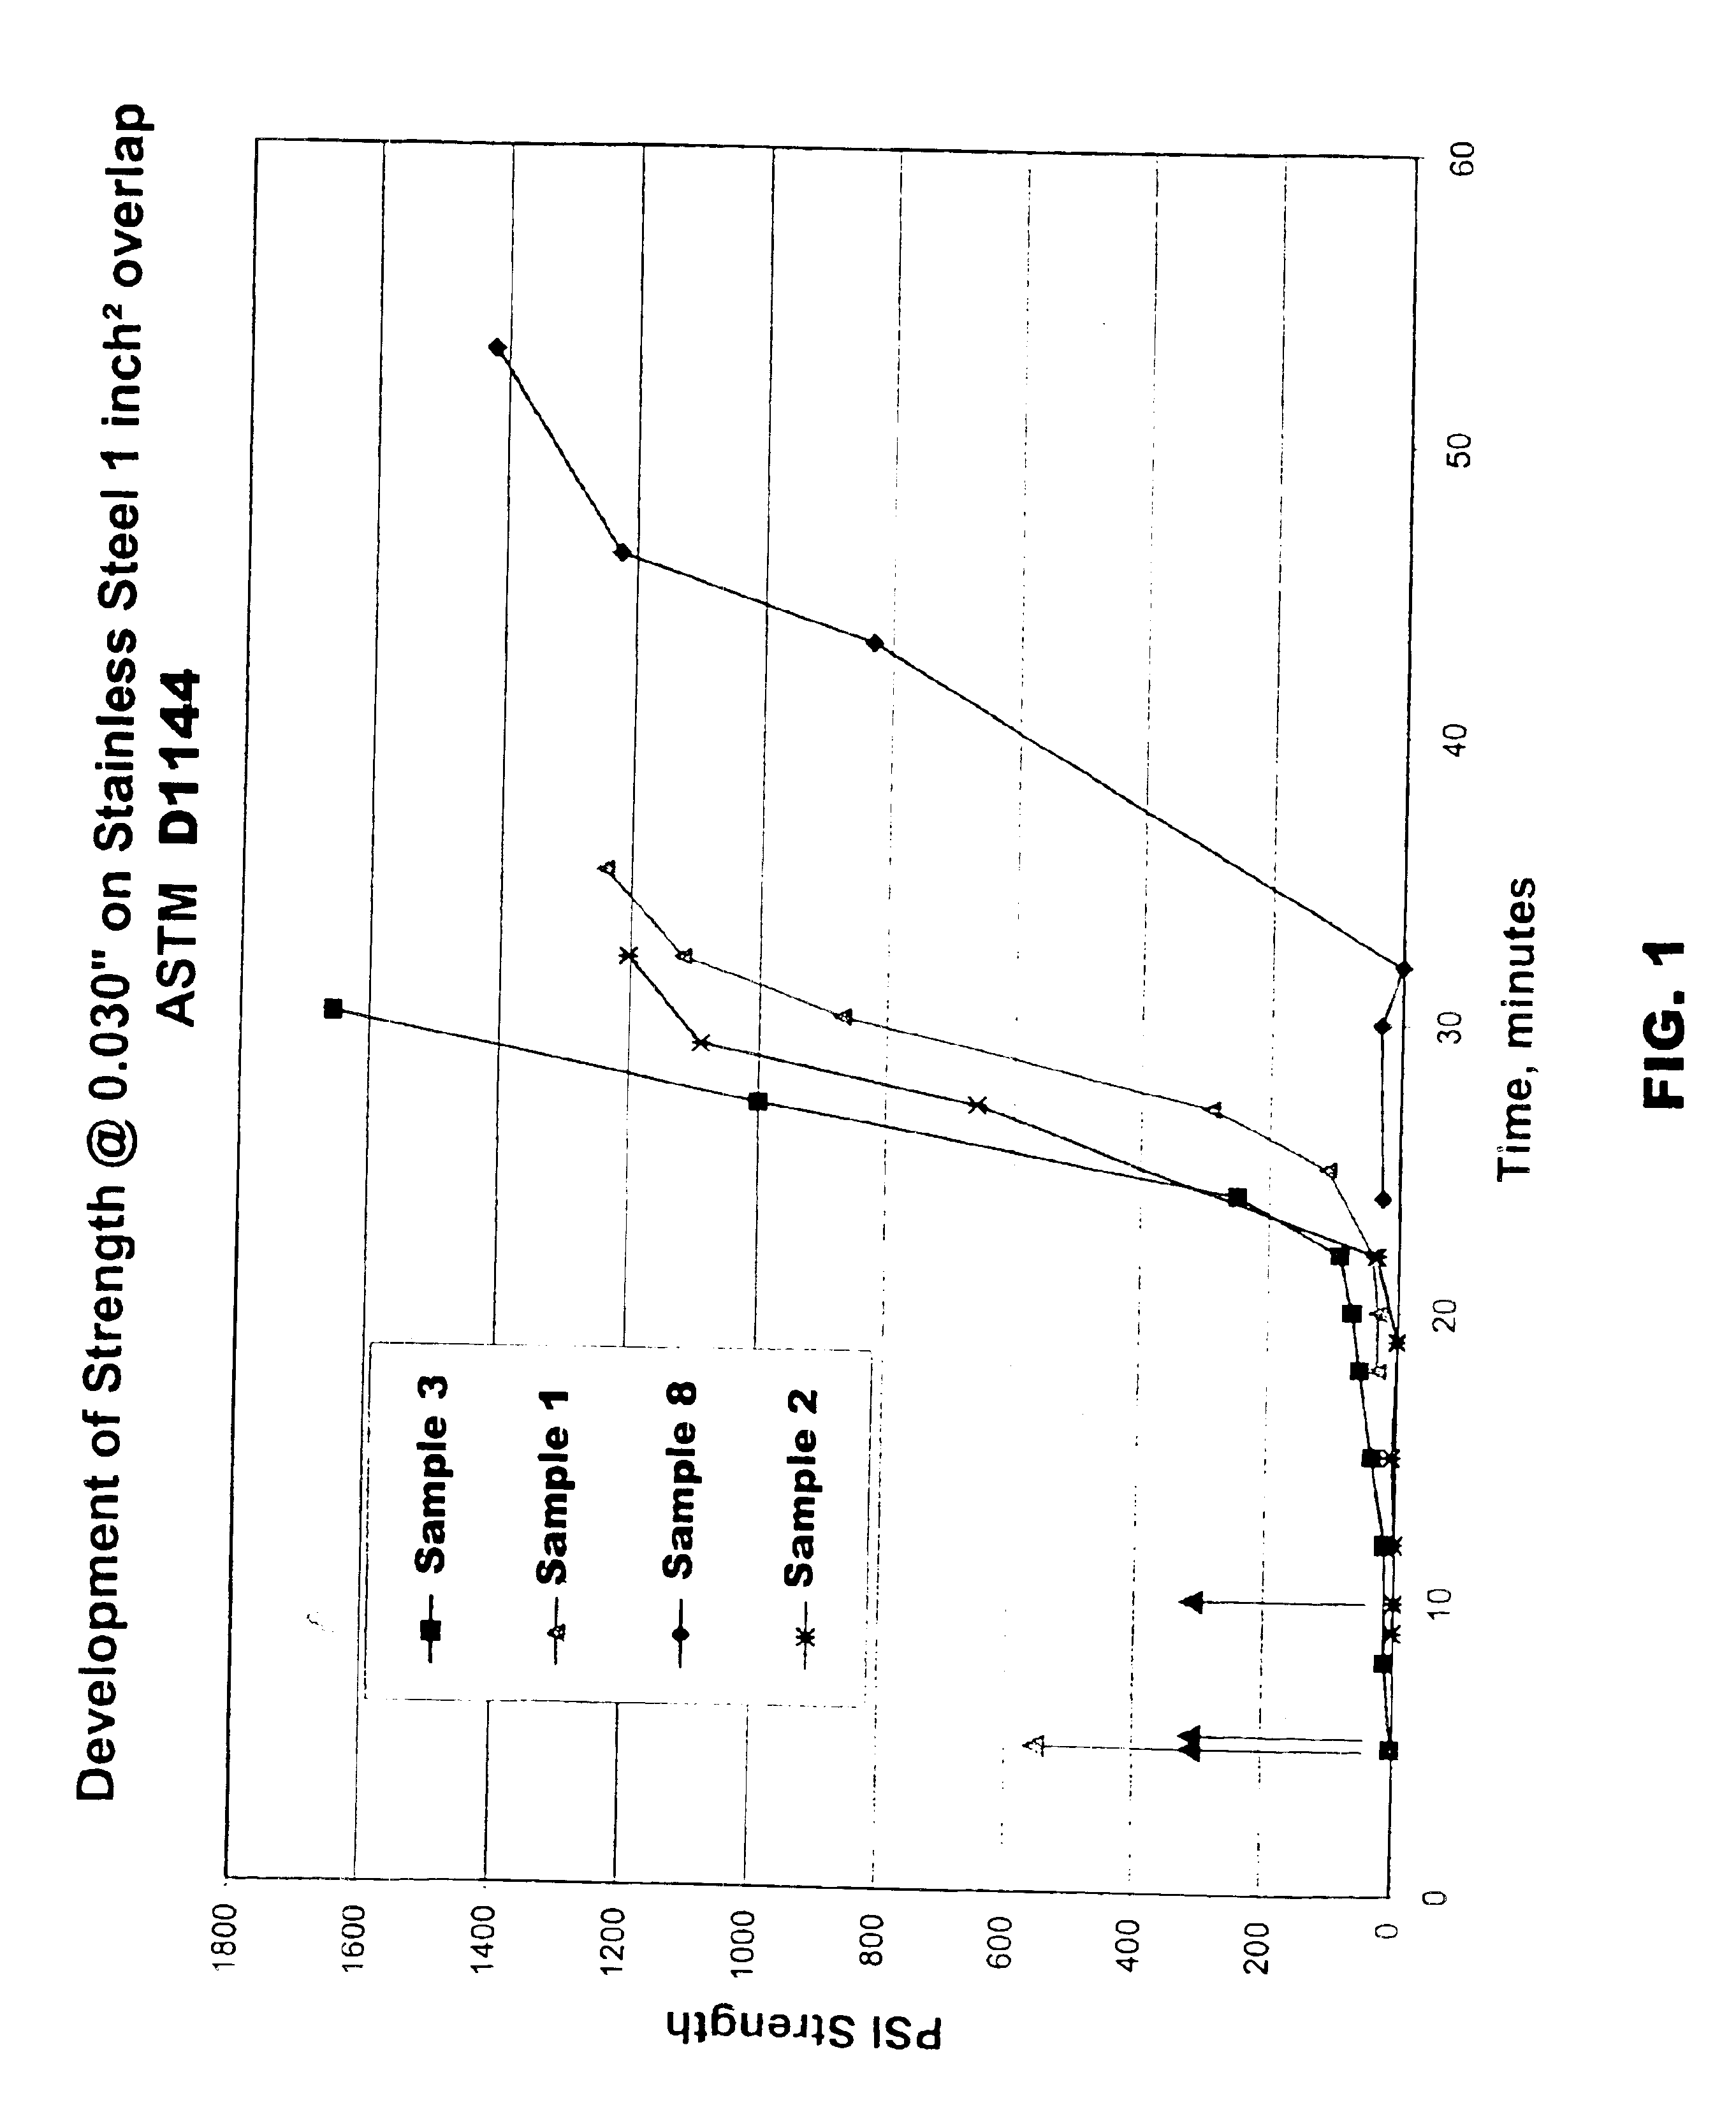 Two-part structural adhesive systems and laminates incorporating the same